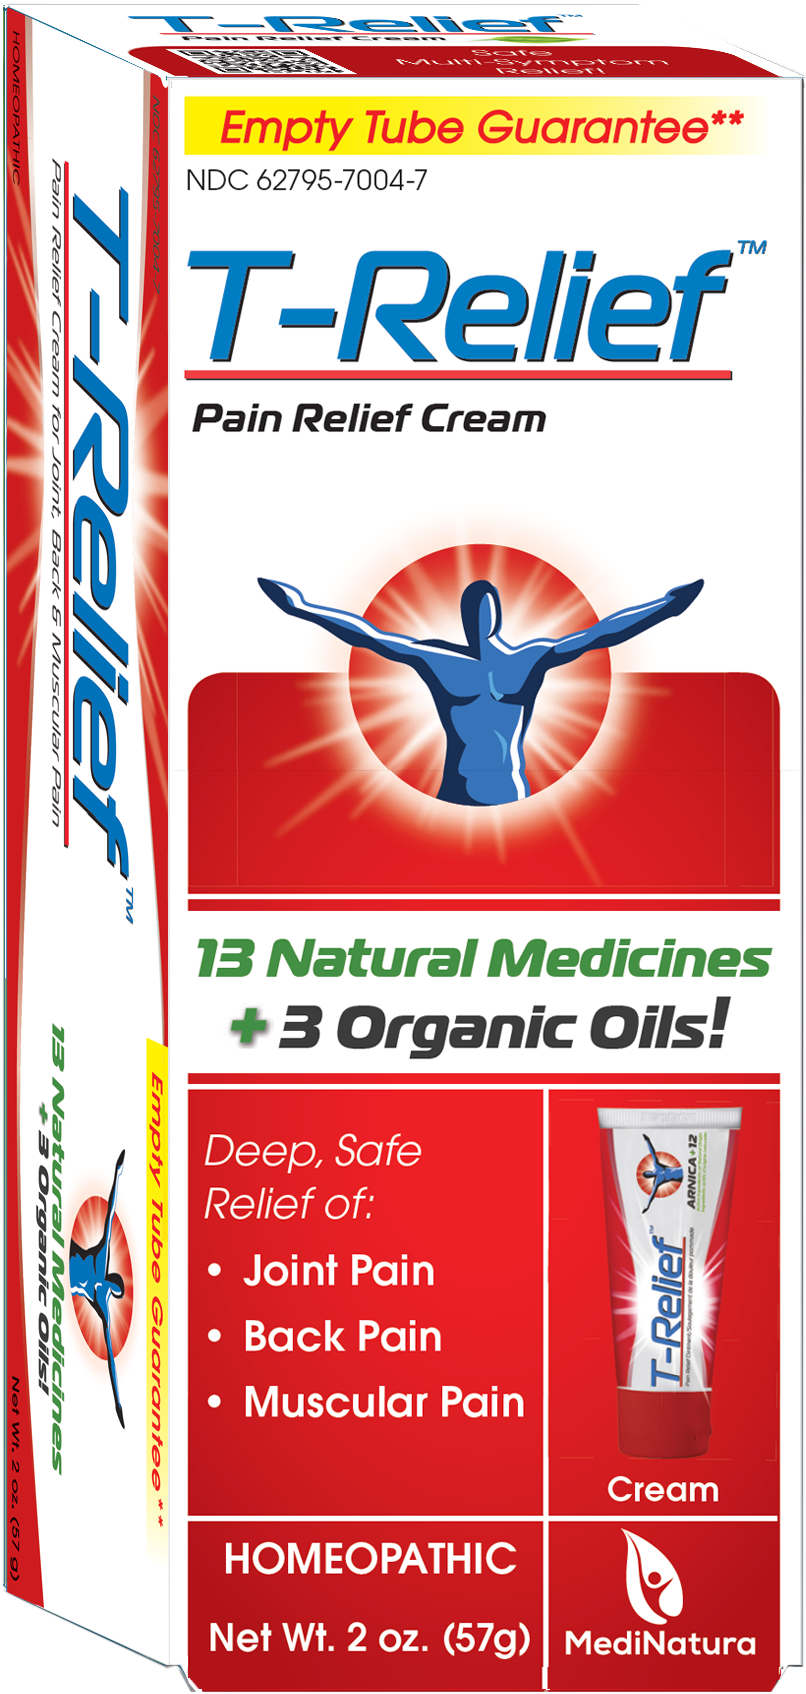 Pain Relief Ointment provides deep, safe relief of a broad spectrum of body pains by MediNatura T-Relief™